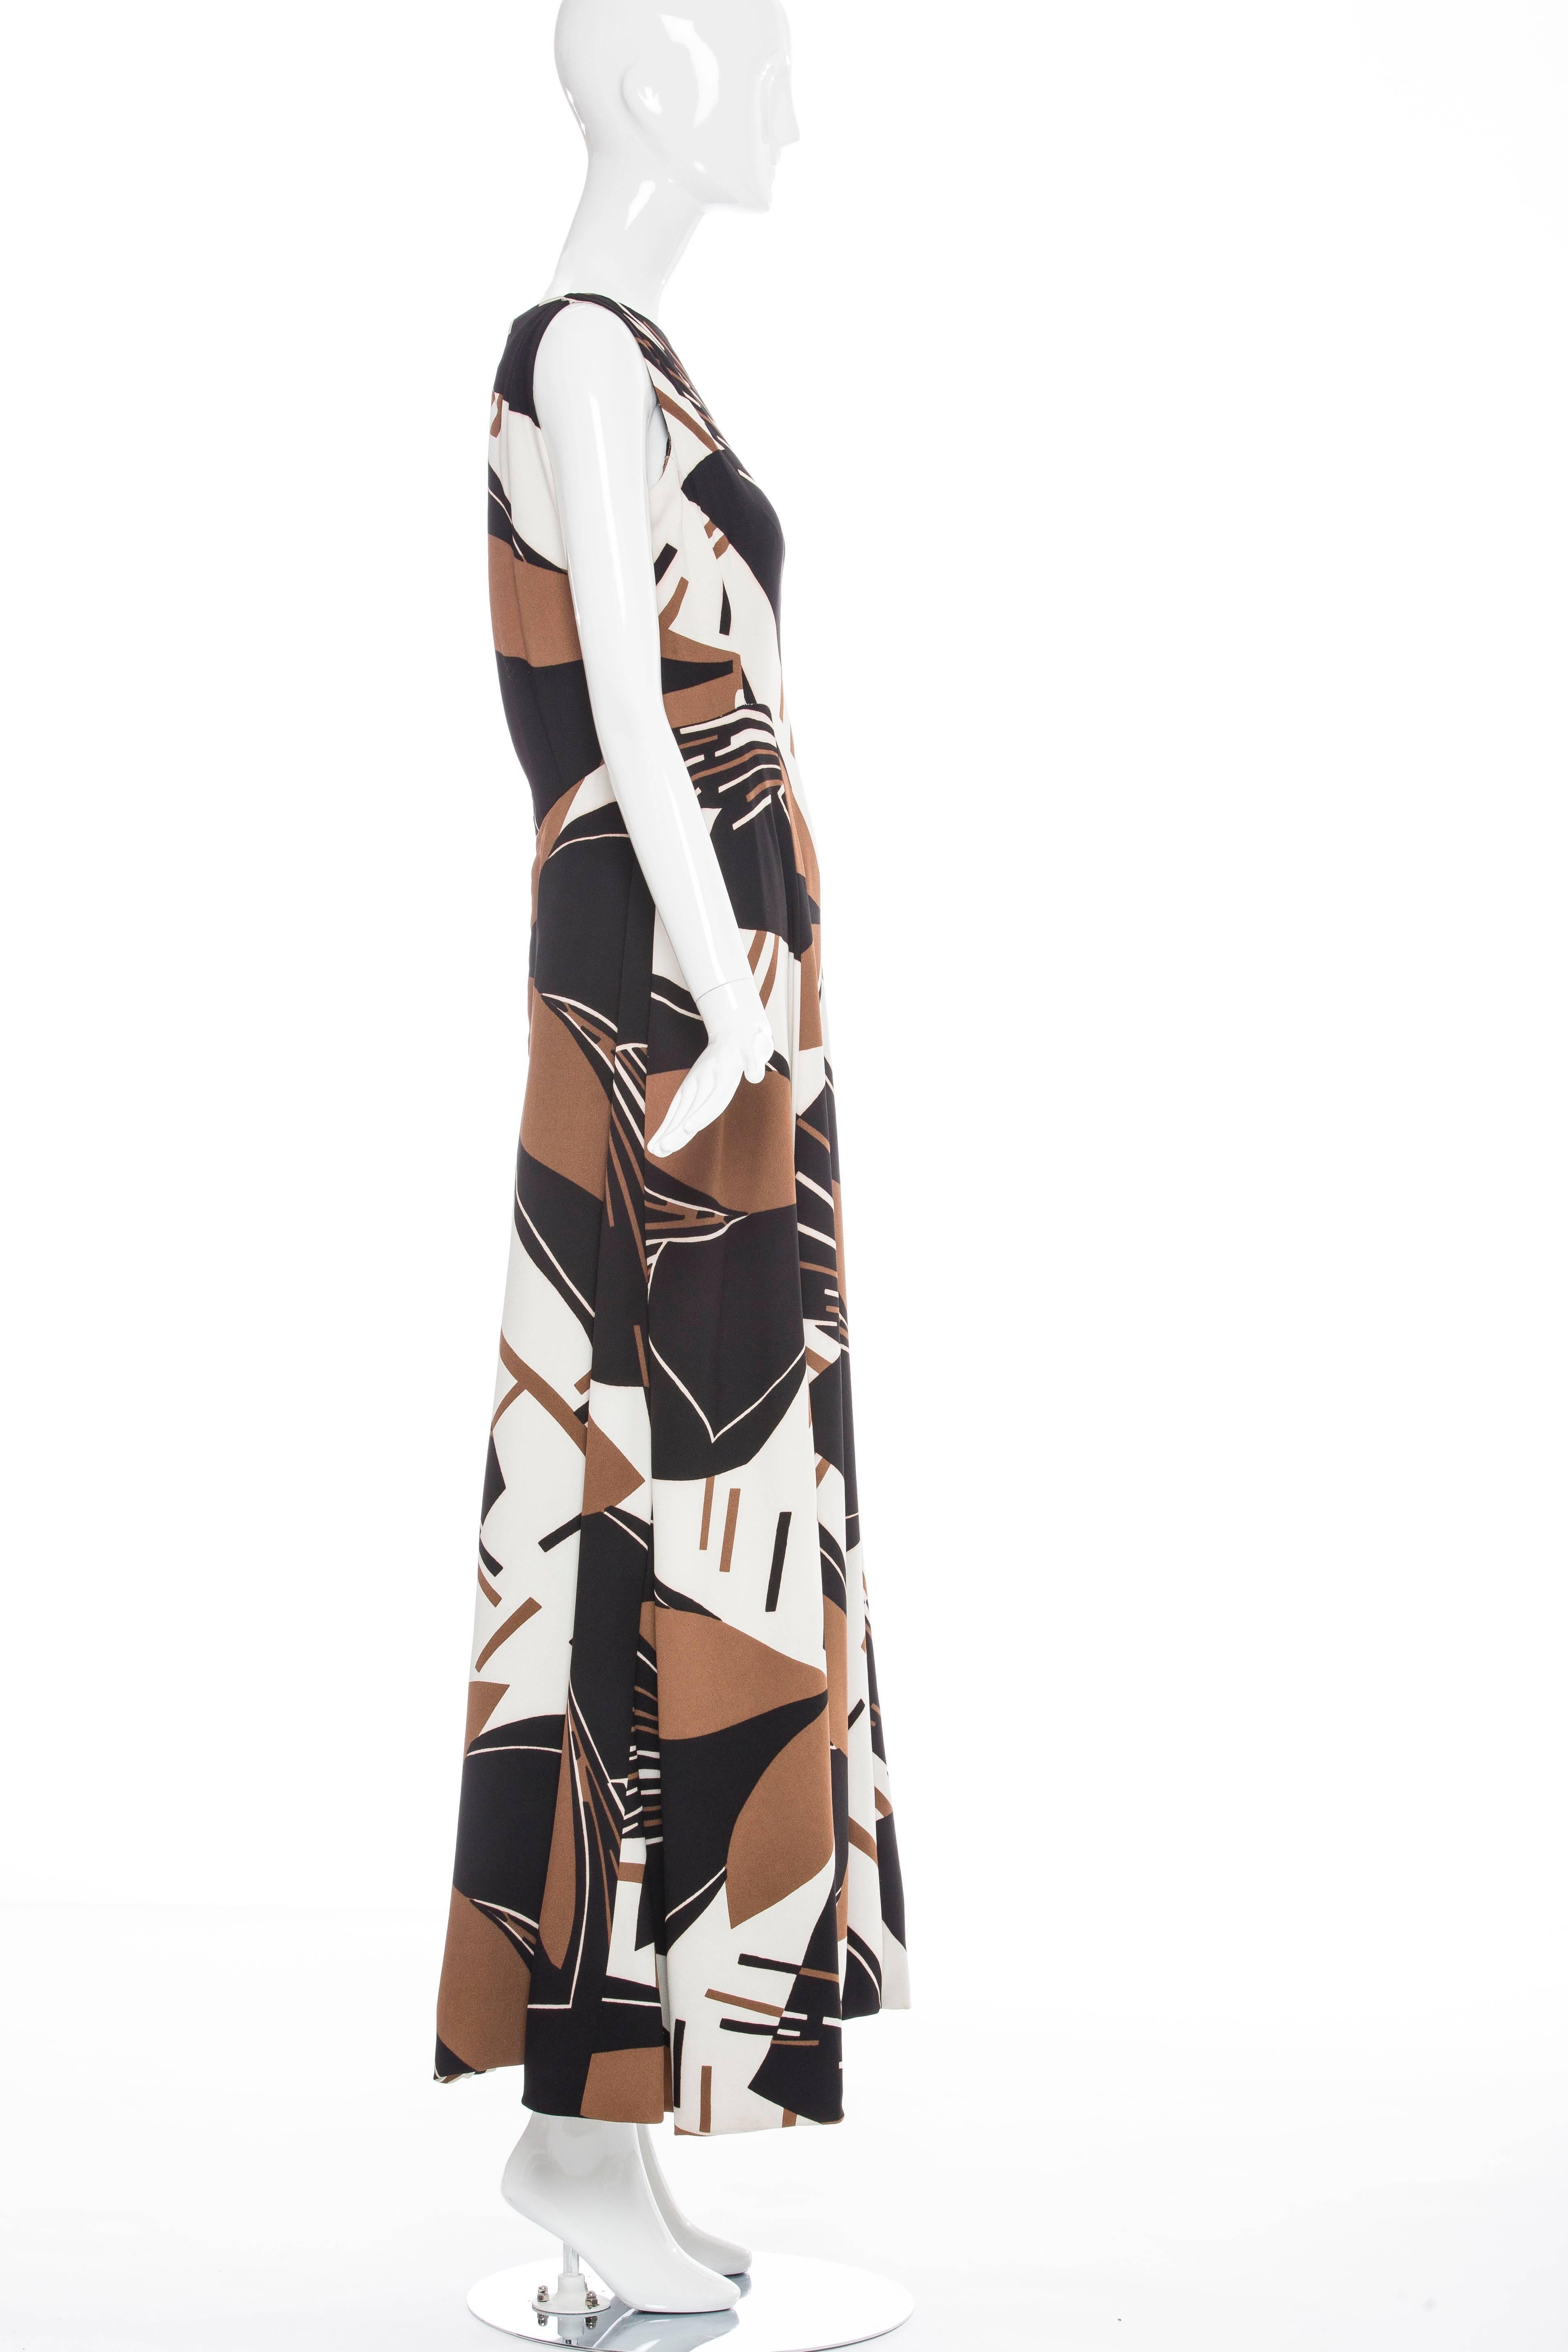 Elinor Simmons for Malcolm Starr, circa 1970's, sleeveless maxi dress with back zip.